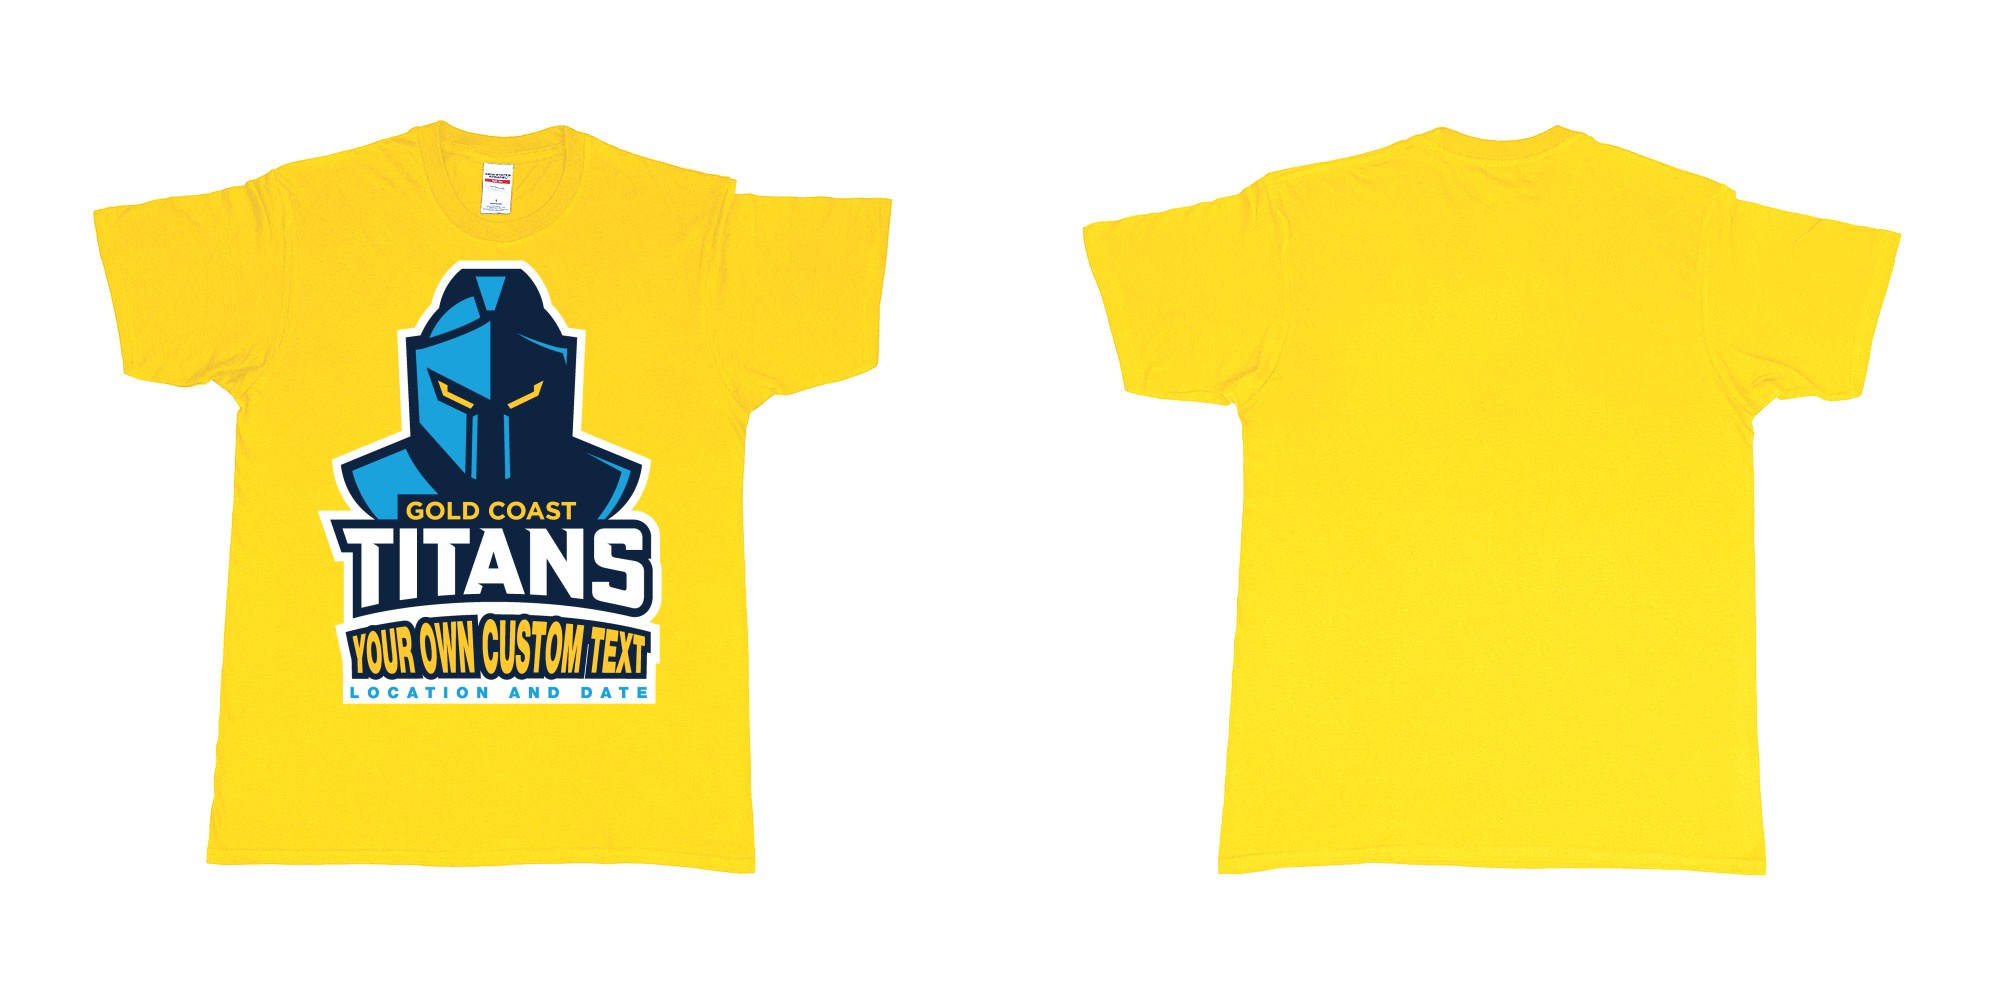 Custom tshirt design gold coast titans own custom design print in fabric color daisy choice your own text made in Bali by The Pirate Way